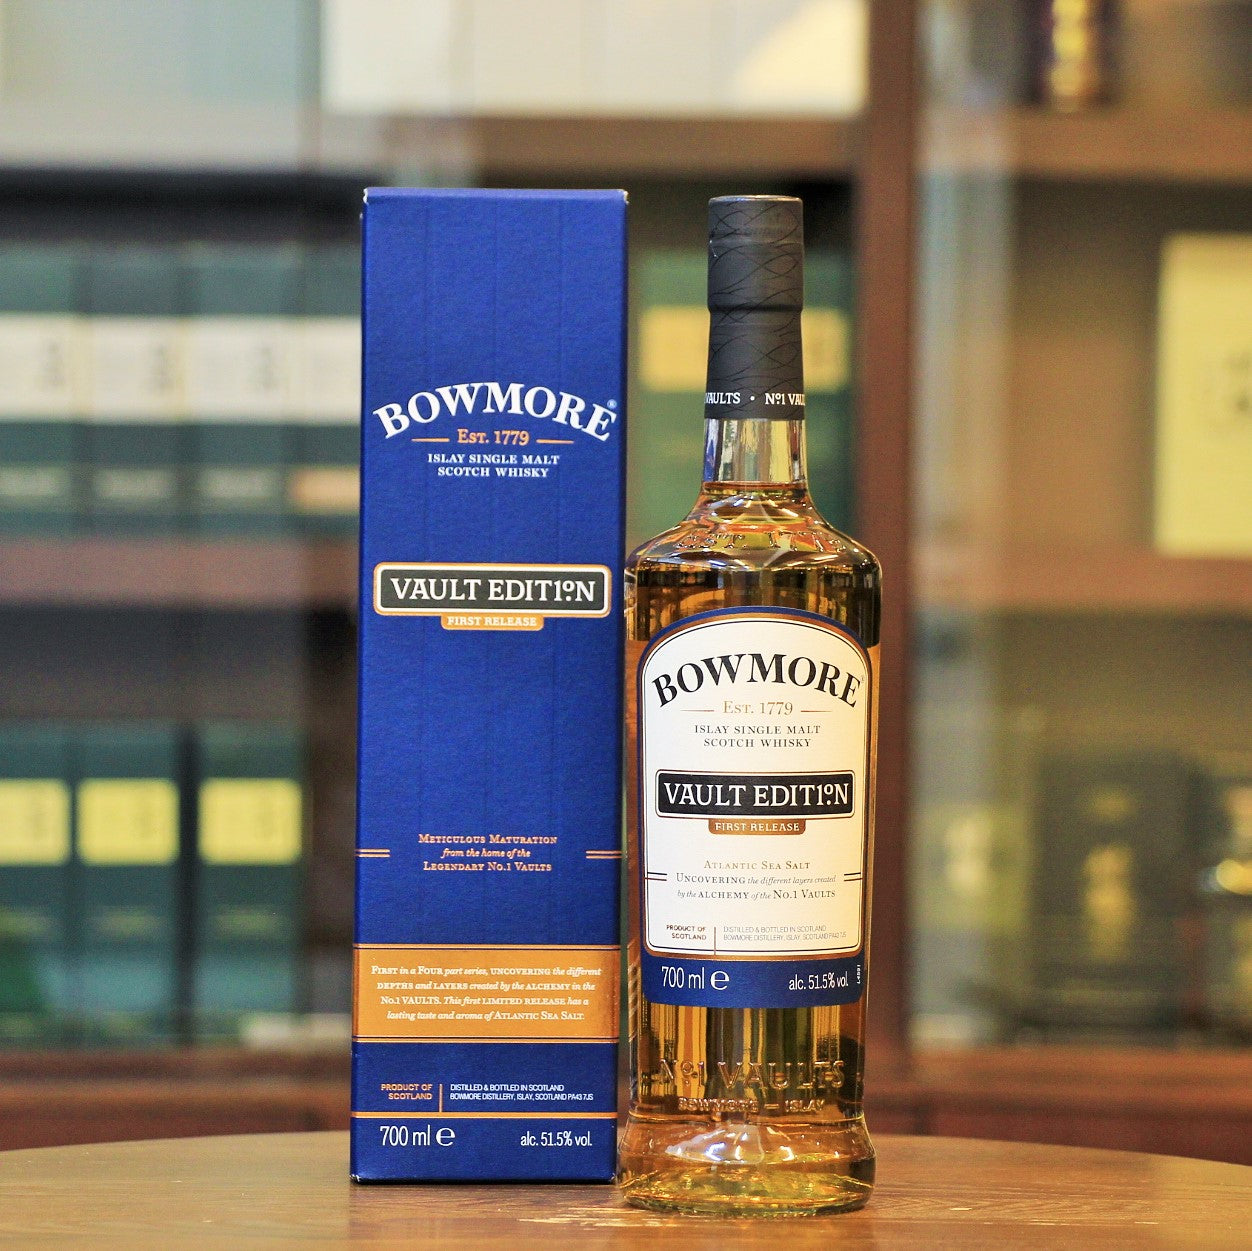 This Islay single malt from Bowmore distillery is the first release of Vault Edition which is four-part series to showcases  different layers characterise. This first edition presents the trademark - Atlantic Sea Salt of Bowmore.  